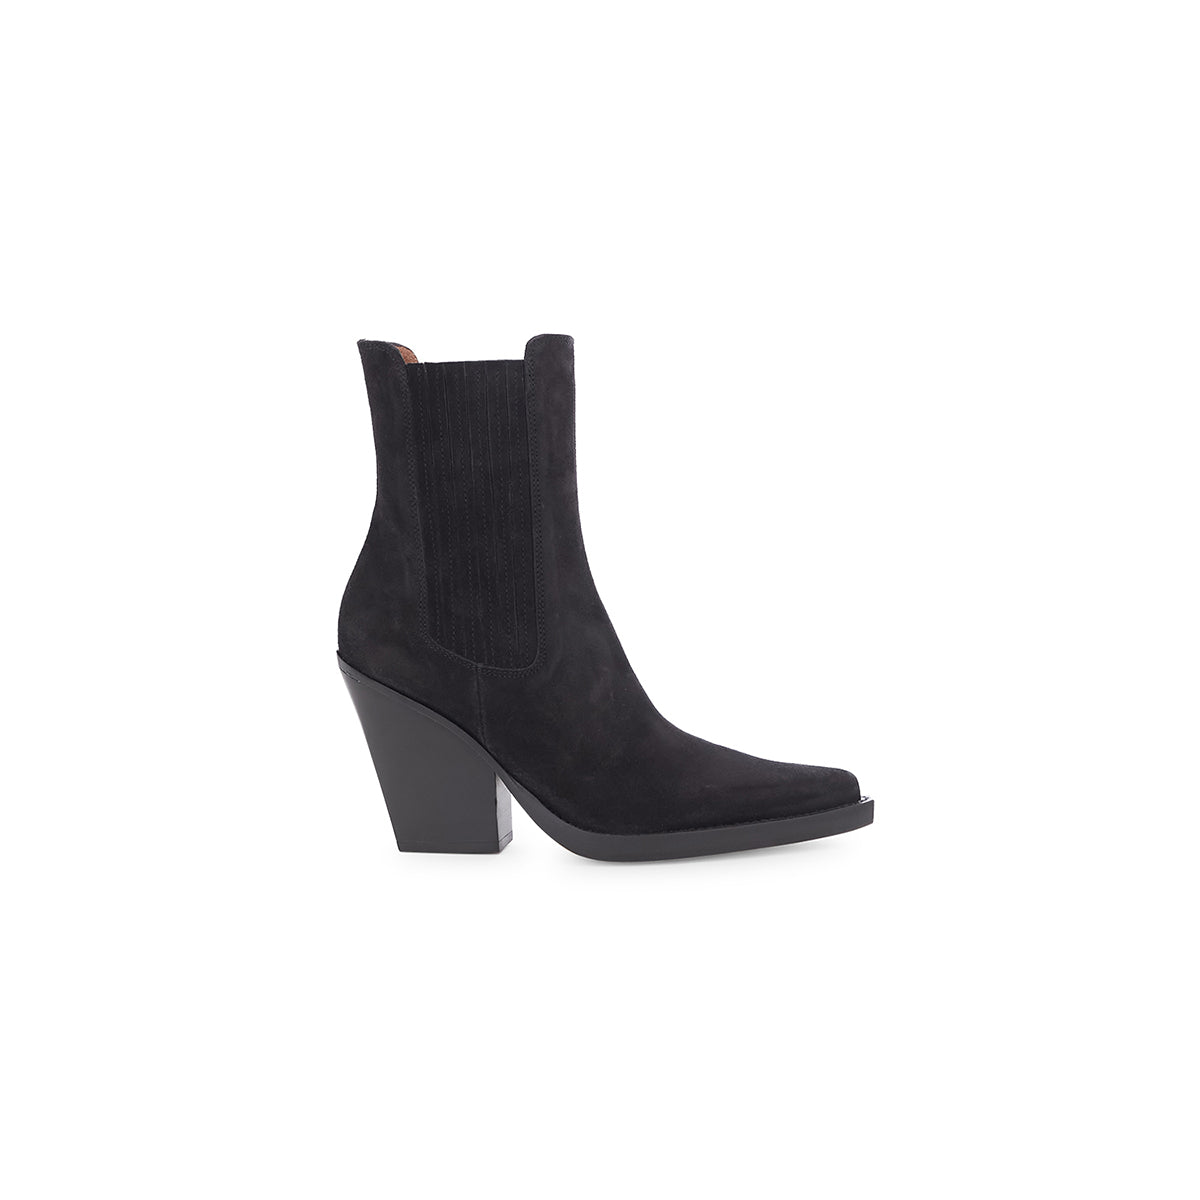 Dallas ankle boot in black suede